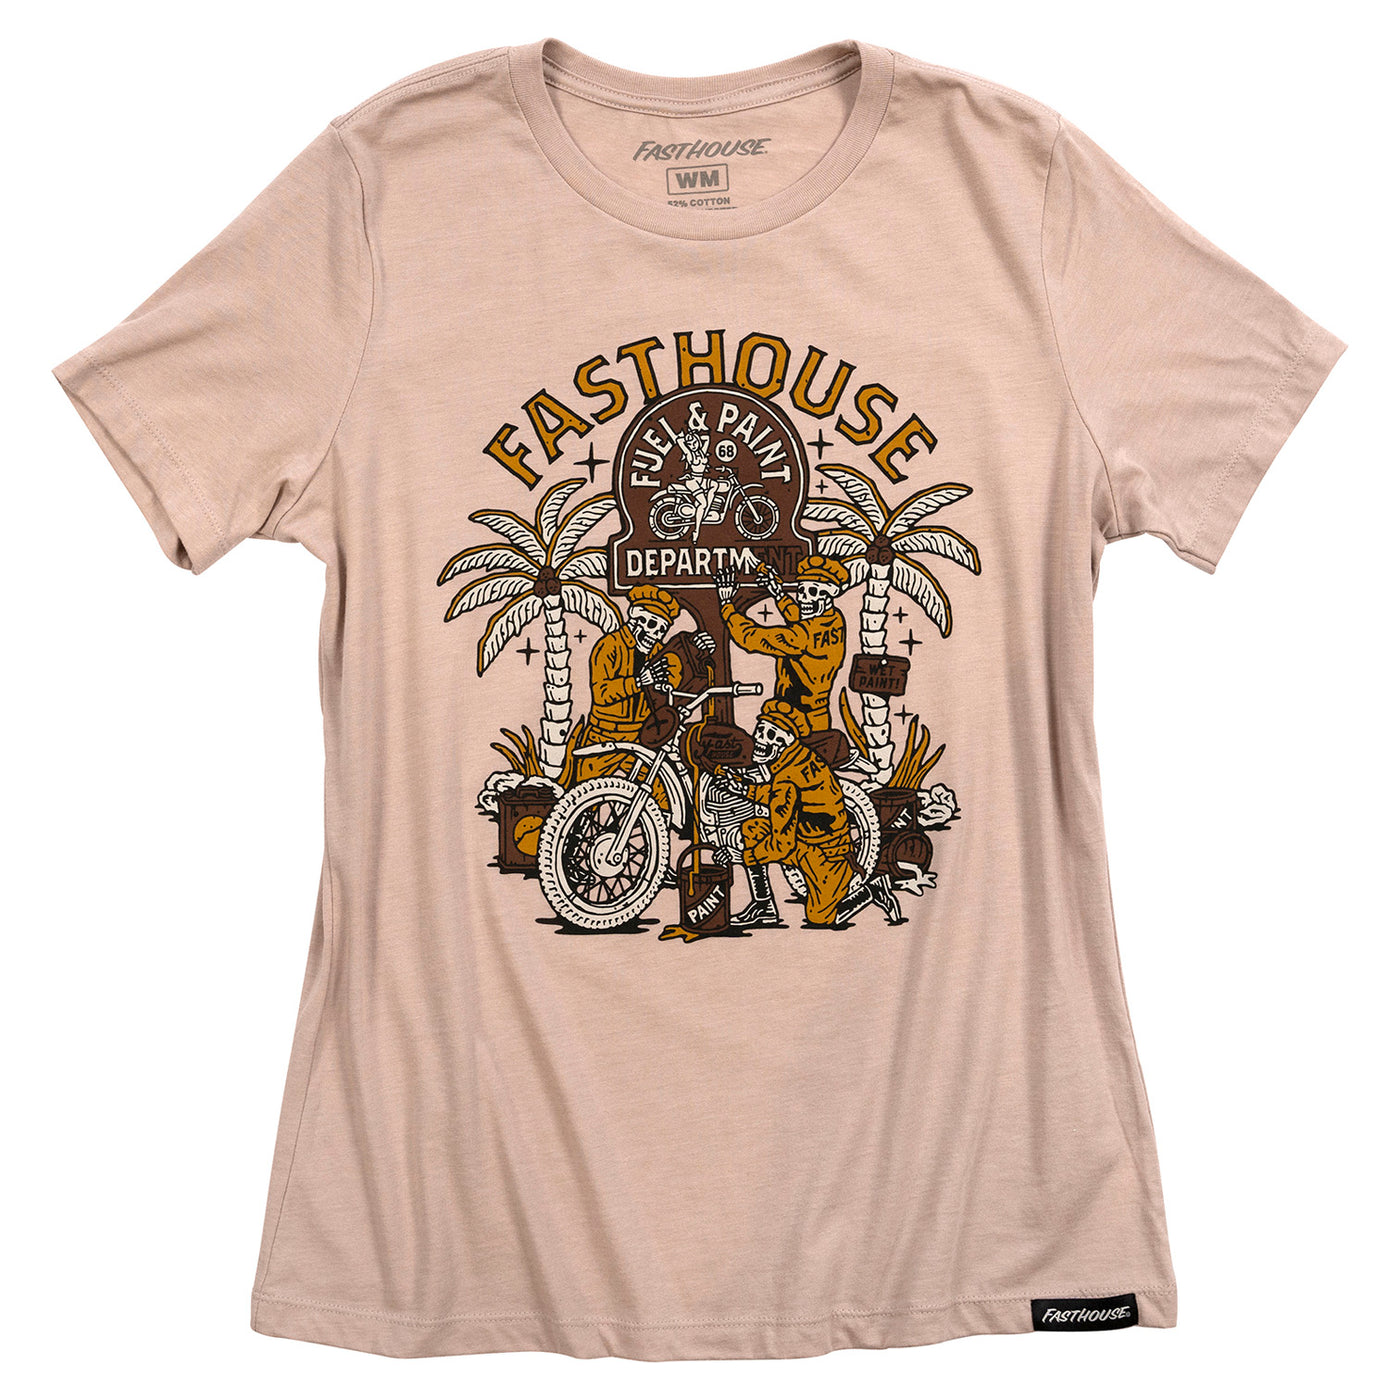 Fasthouse Women's Macabre Tee